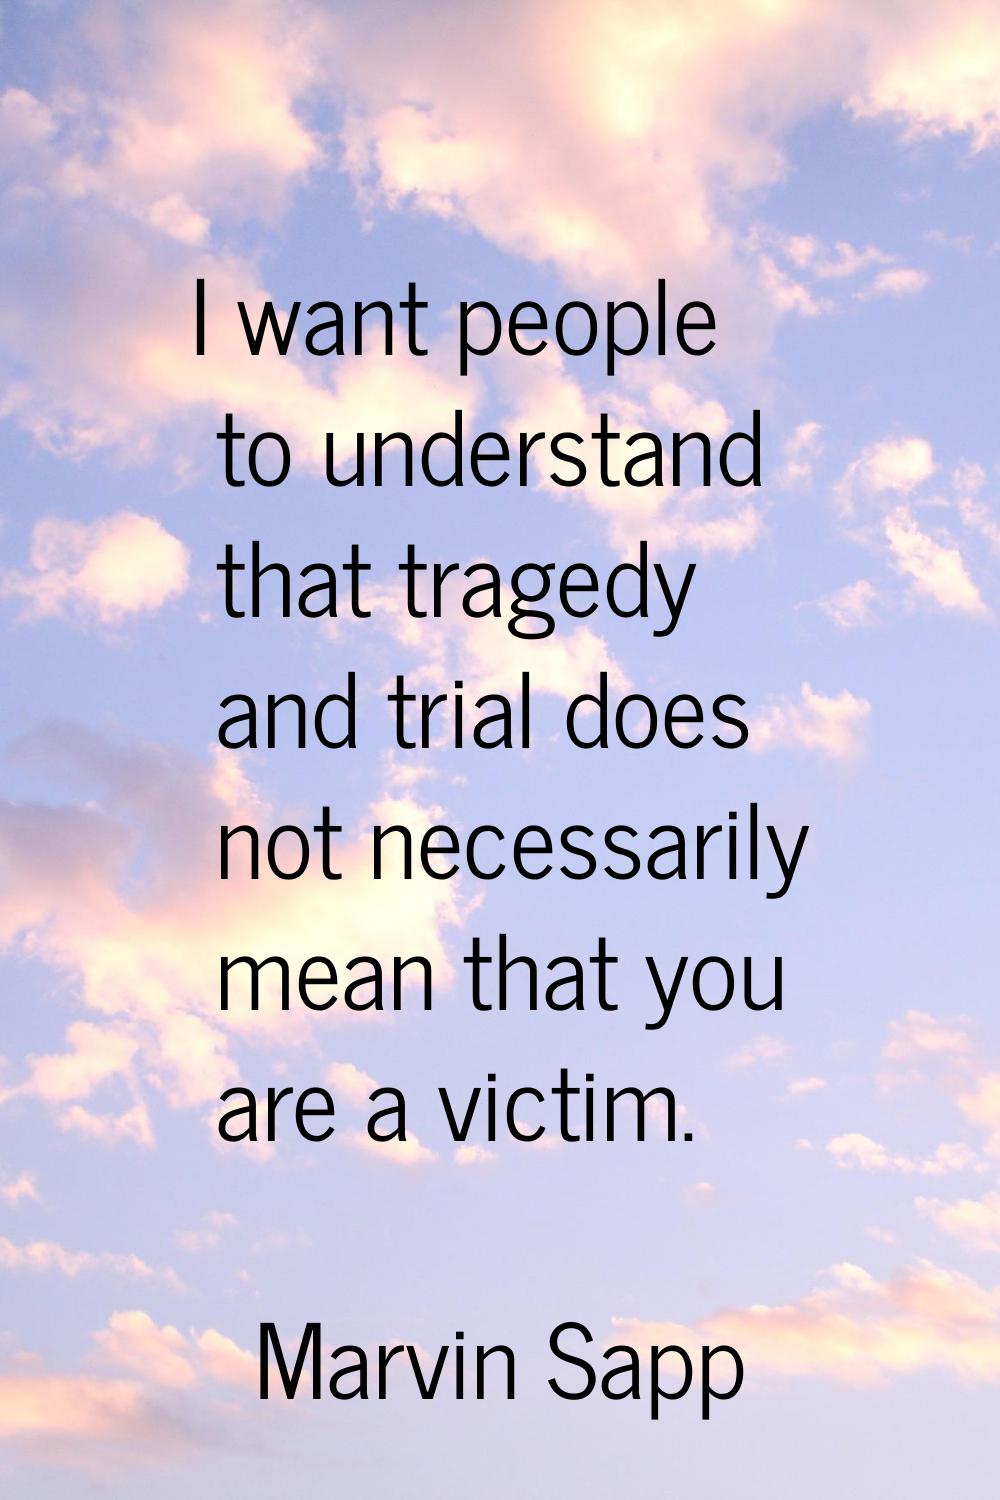 I want people to understand that tragedy and trial does not necessarily mean that you are a victim.